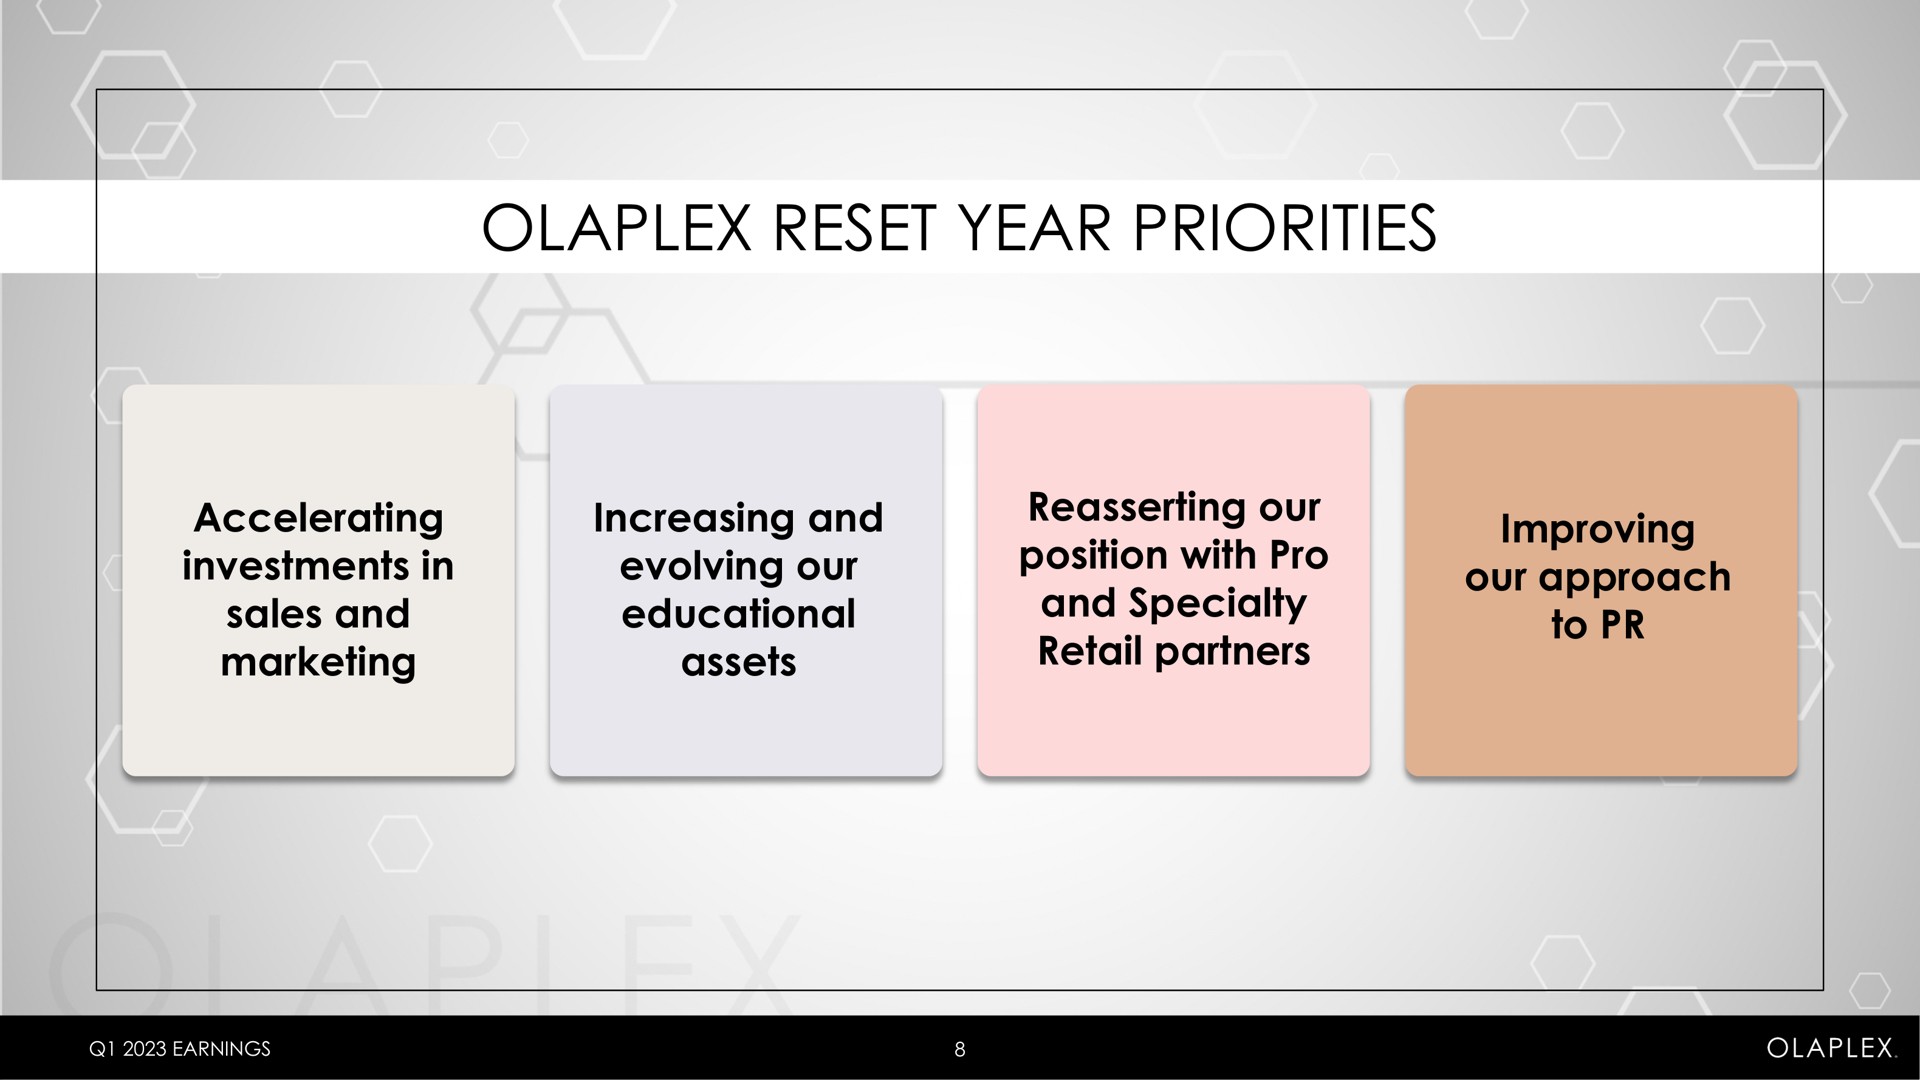 reset year priorities accelerating investments in sales and marketing increasing and evolving our educational assets reasserting our position with pro and specialty improving our approach to retail partners | Olaplex